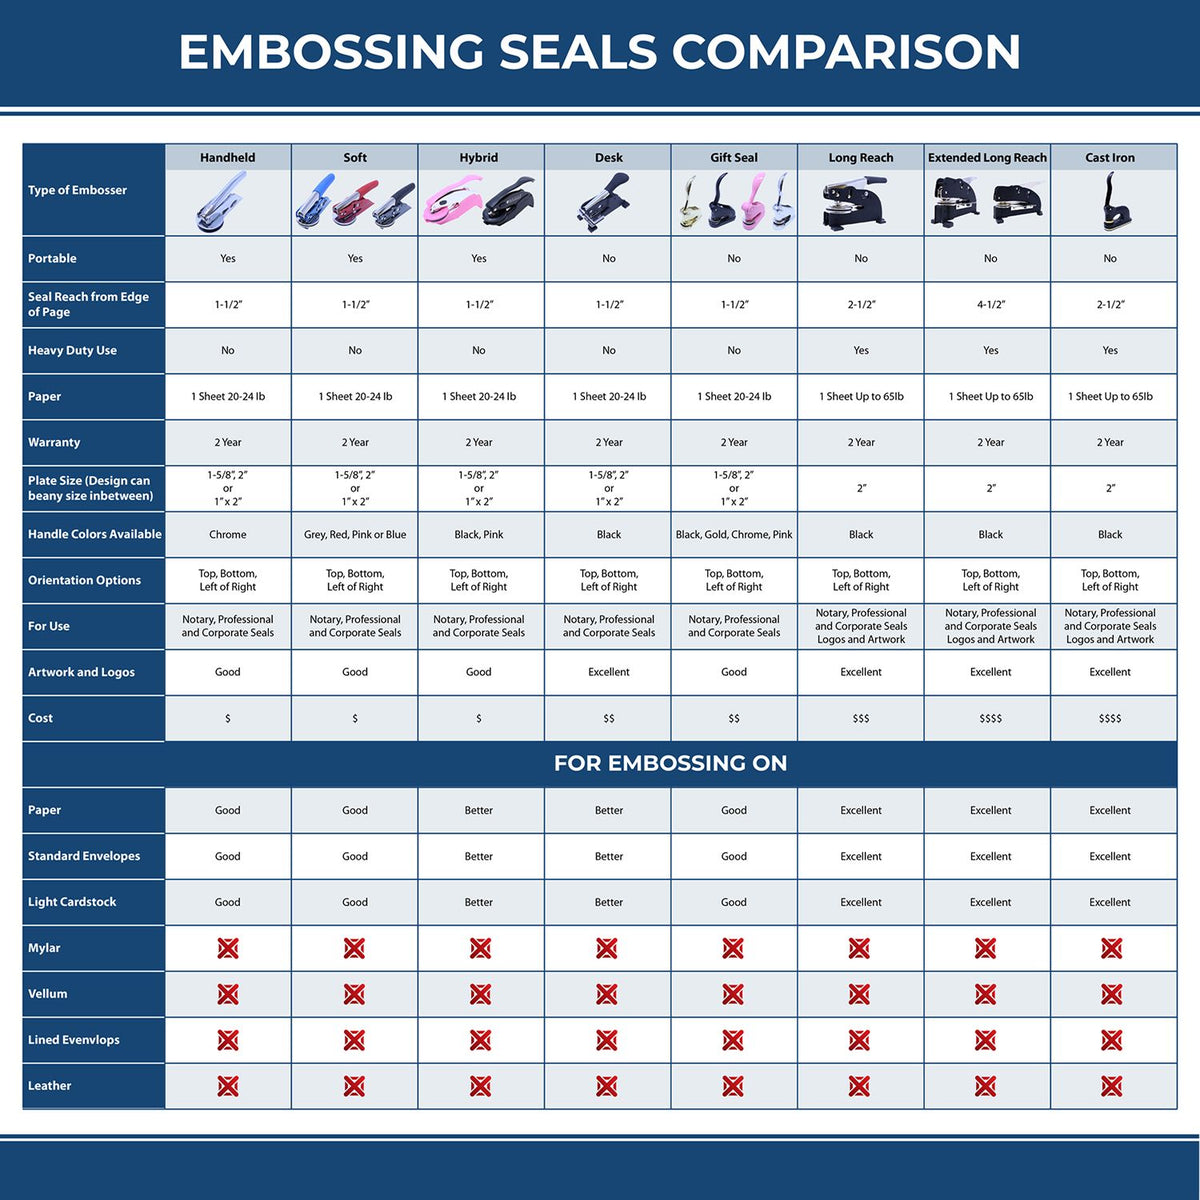 A comparison chart for the different types of mount models available for the Hybrid Vermont Land Surveyor Seal